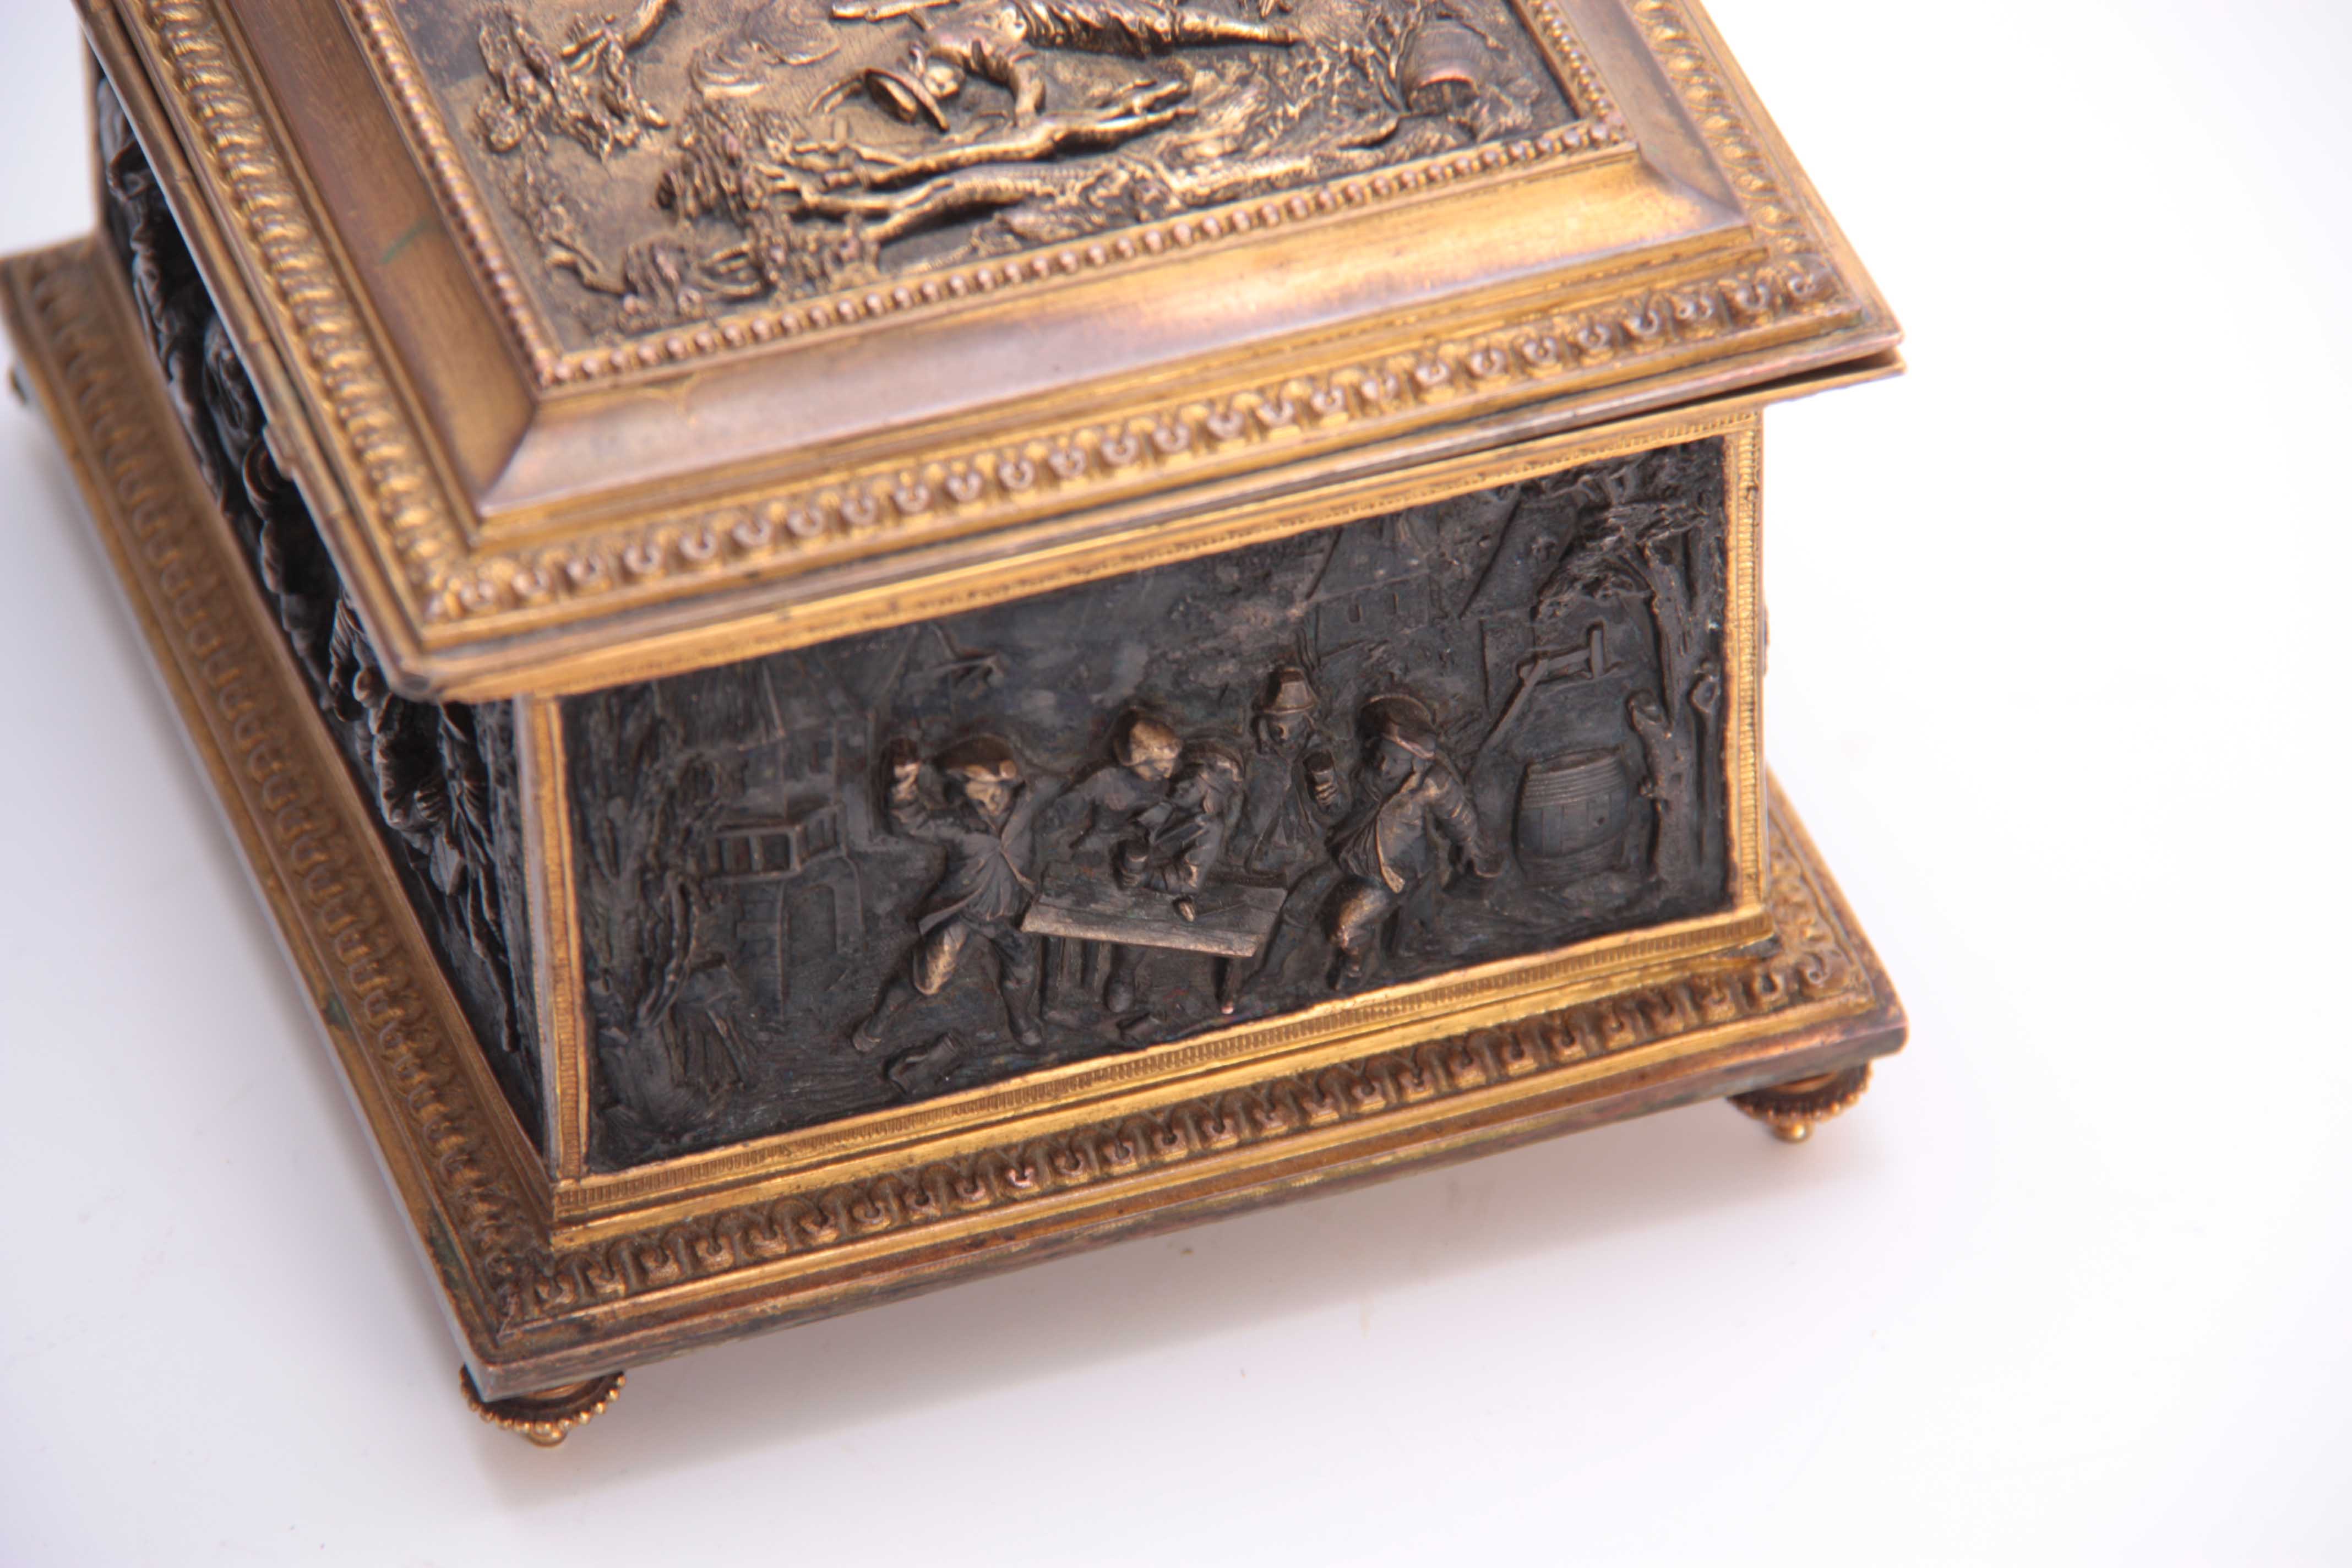 A LATE 19TH CENTURY CONTINENTAL GILT BRASS JEWELLERY CASKET set with cast bronzed figural panels - Image 7 of 9